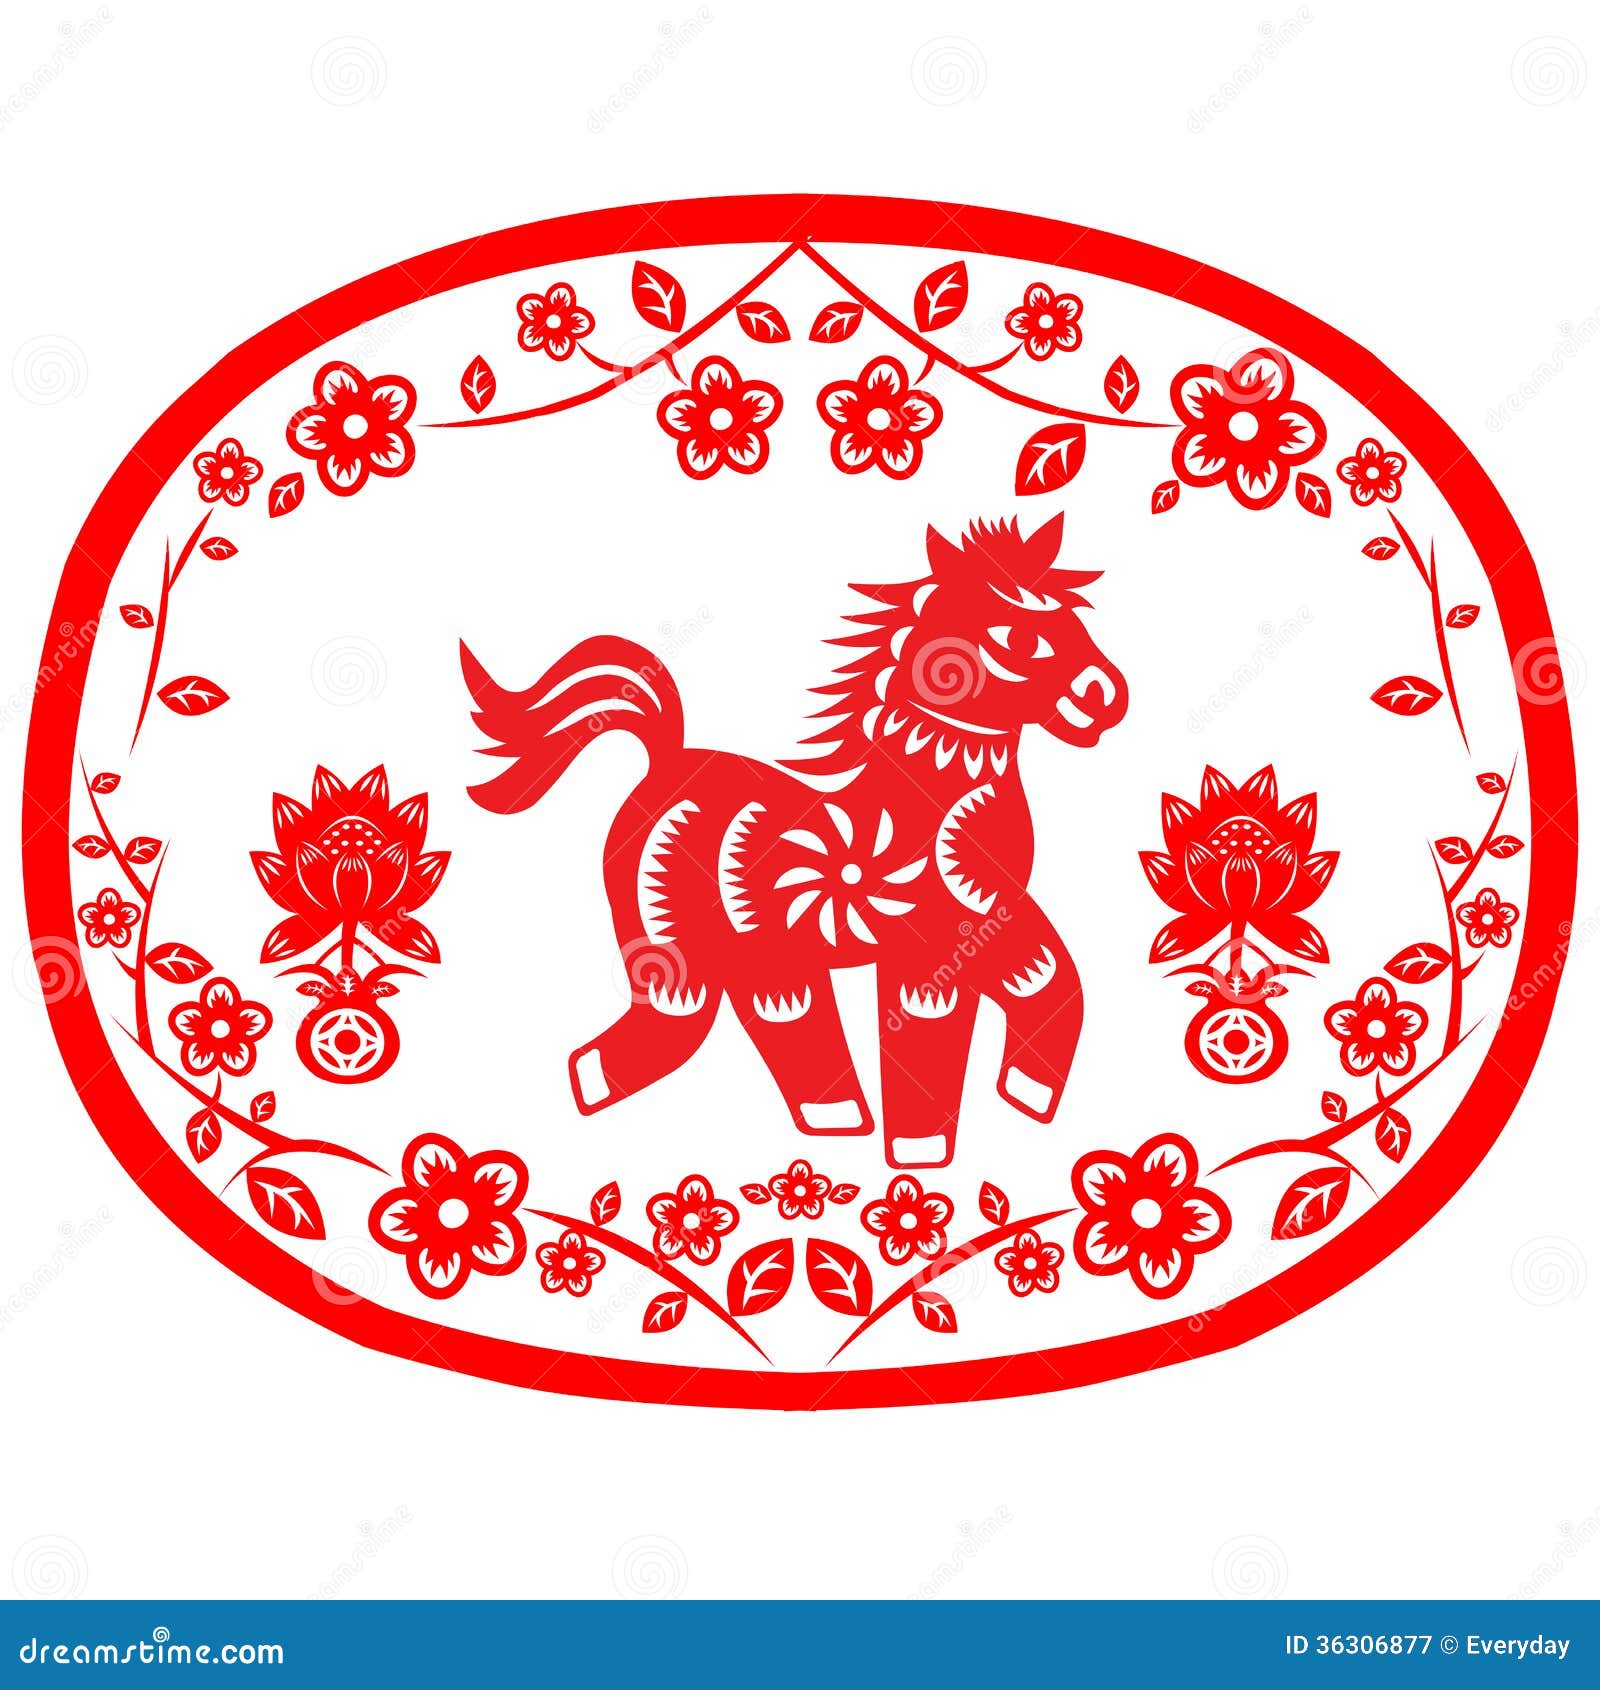 clip art year of the horse - photo #10